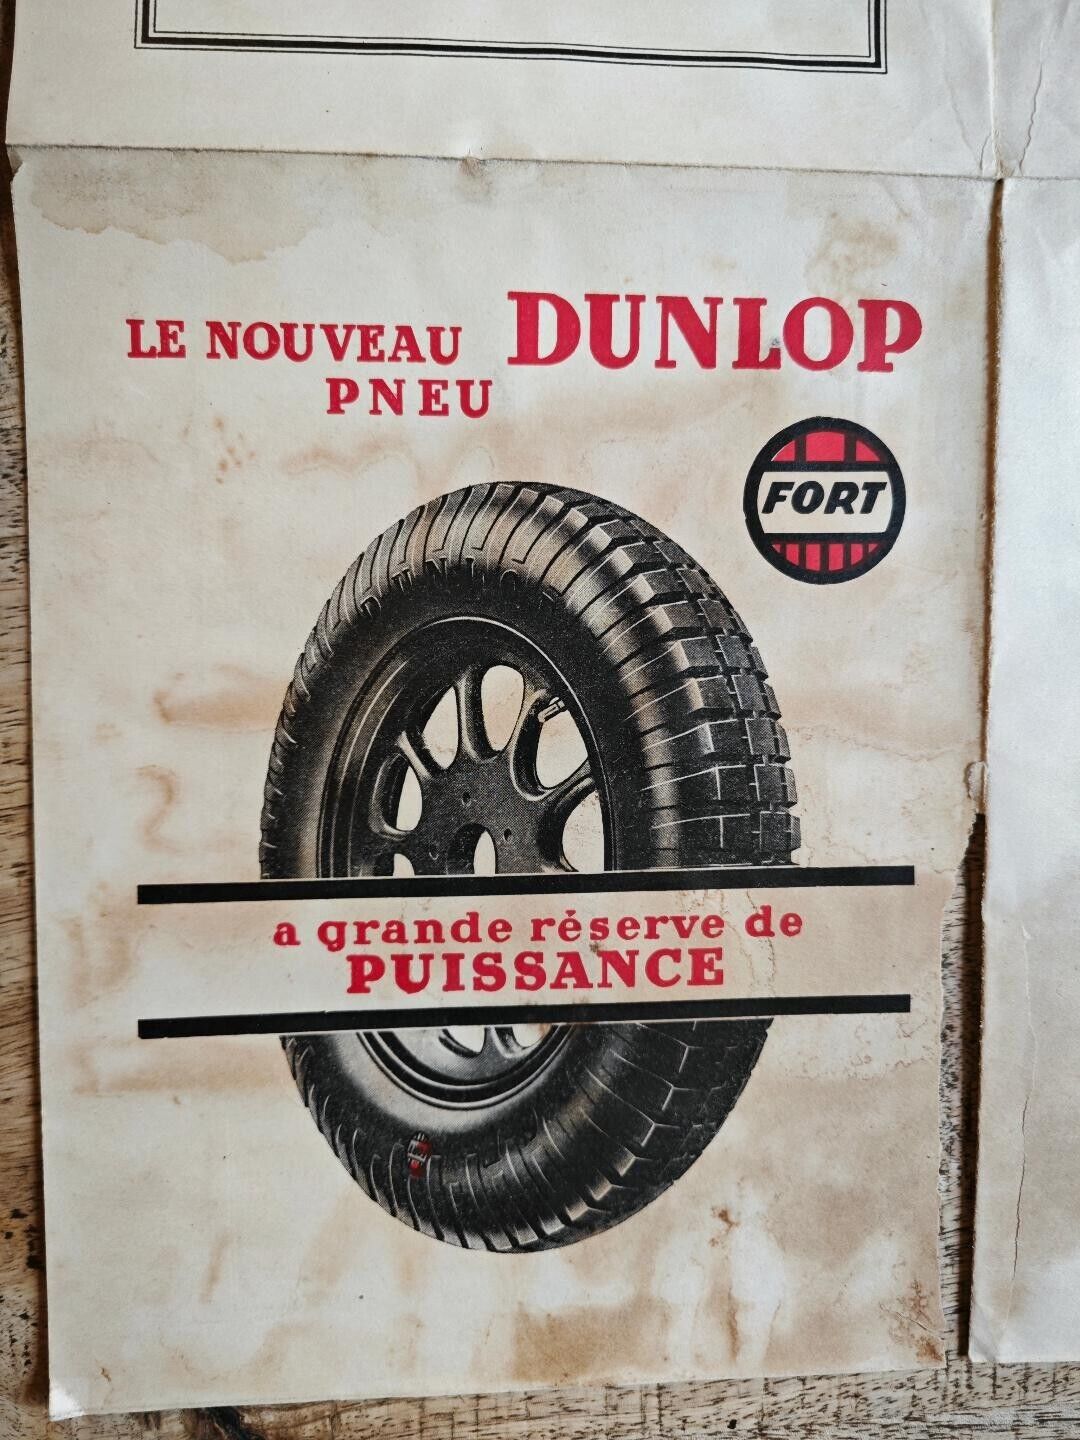 1930 DUNLOP SHELL Nord Map no Michelin Esso Mobil Spido